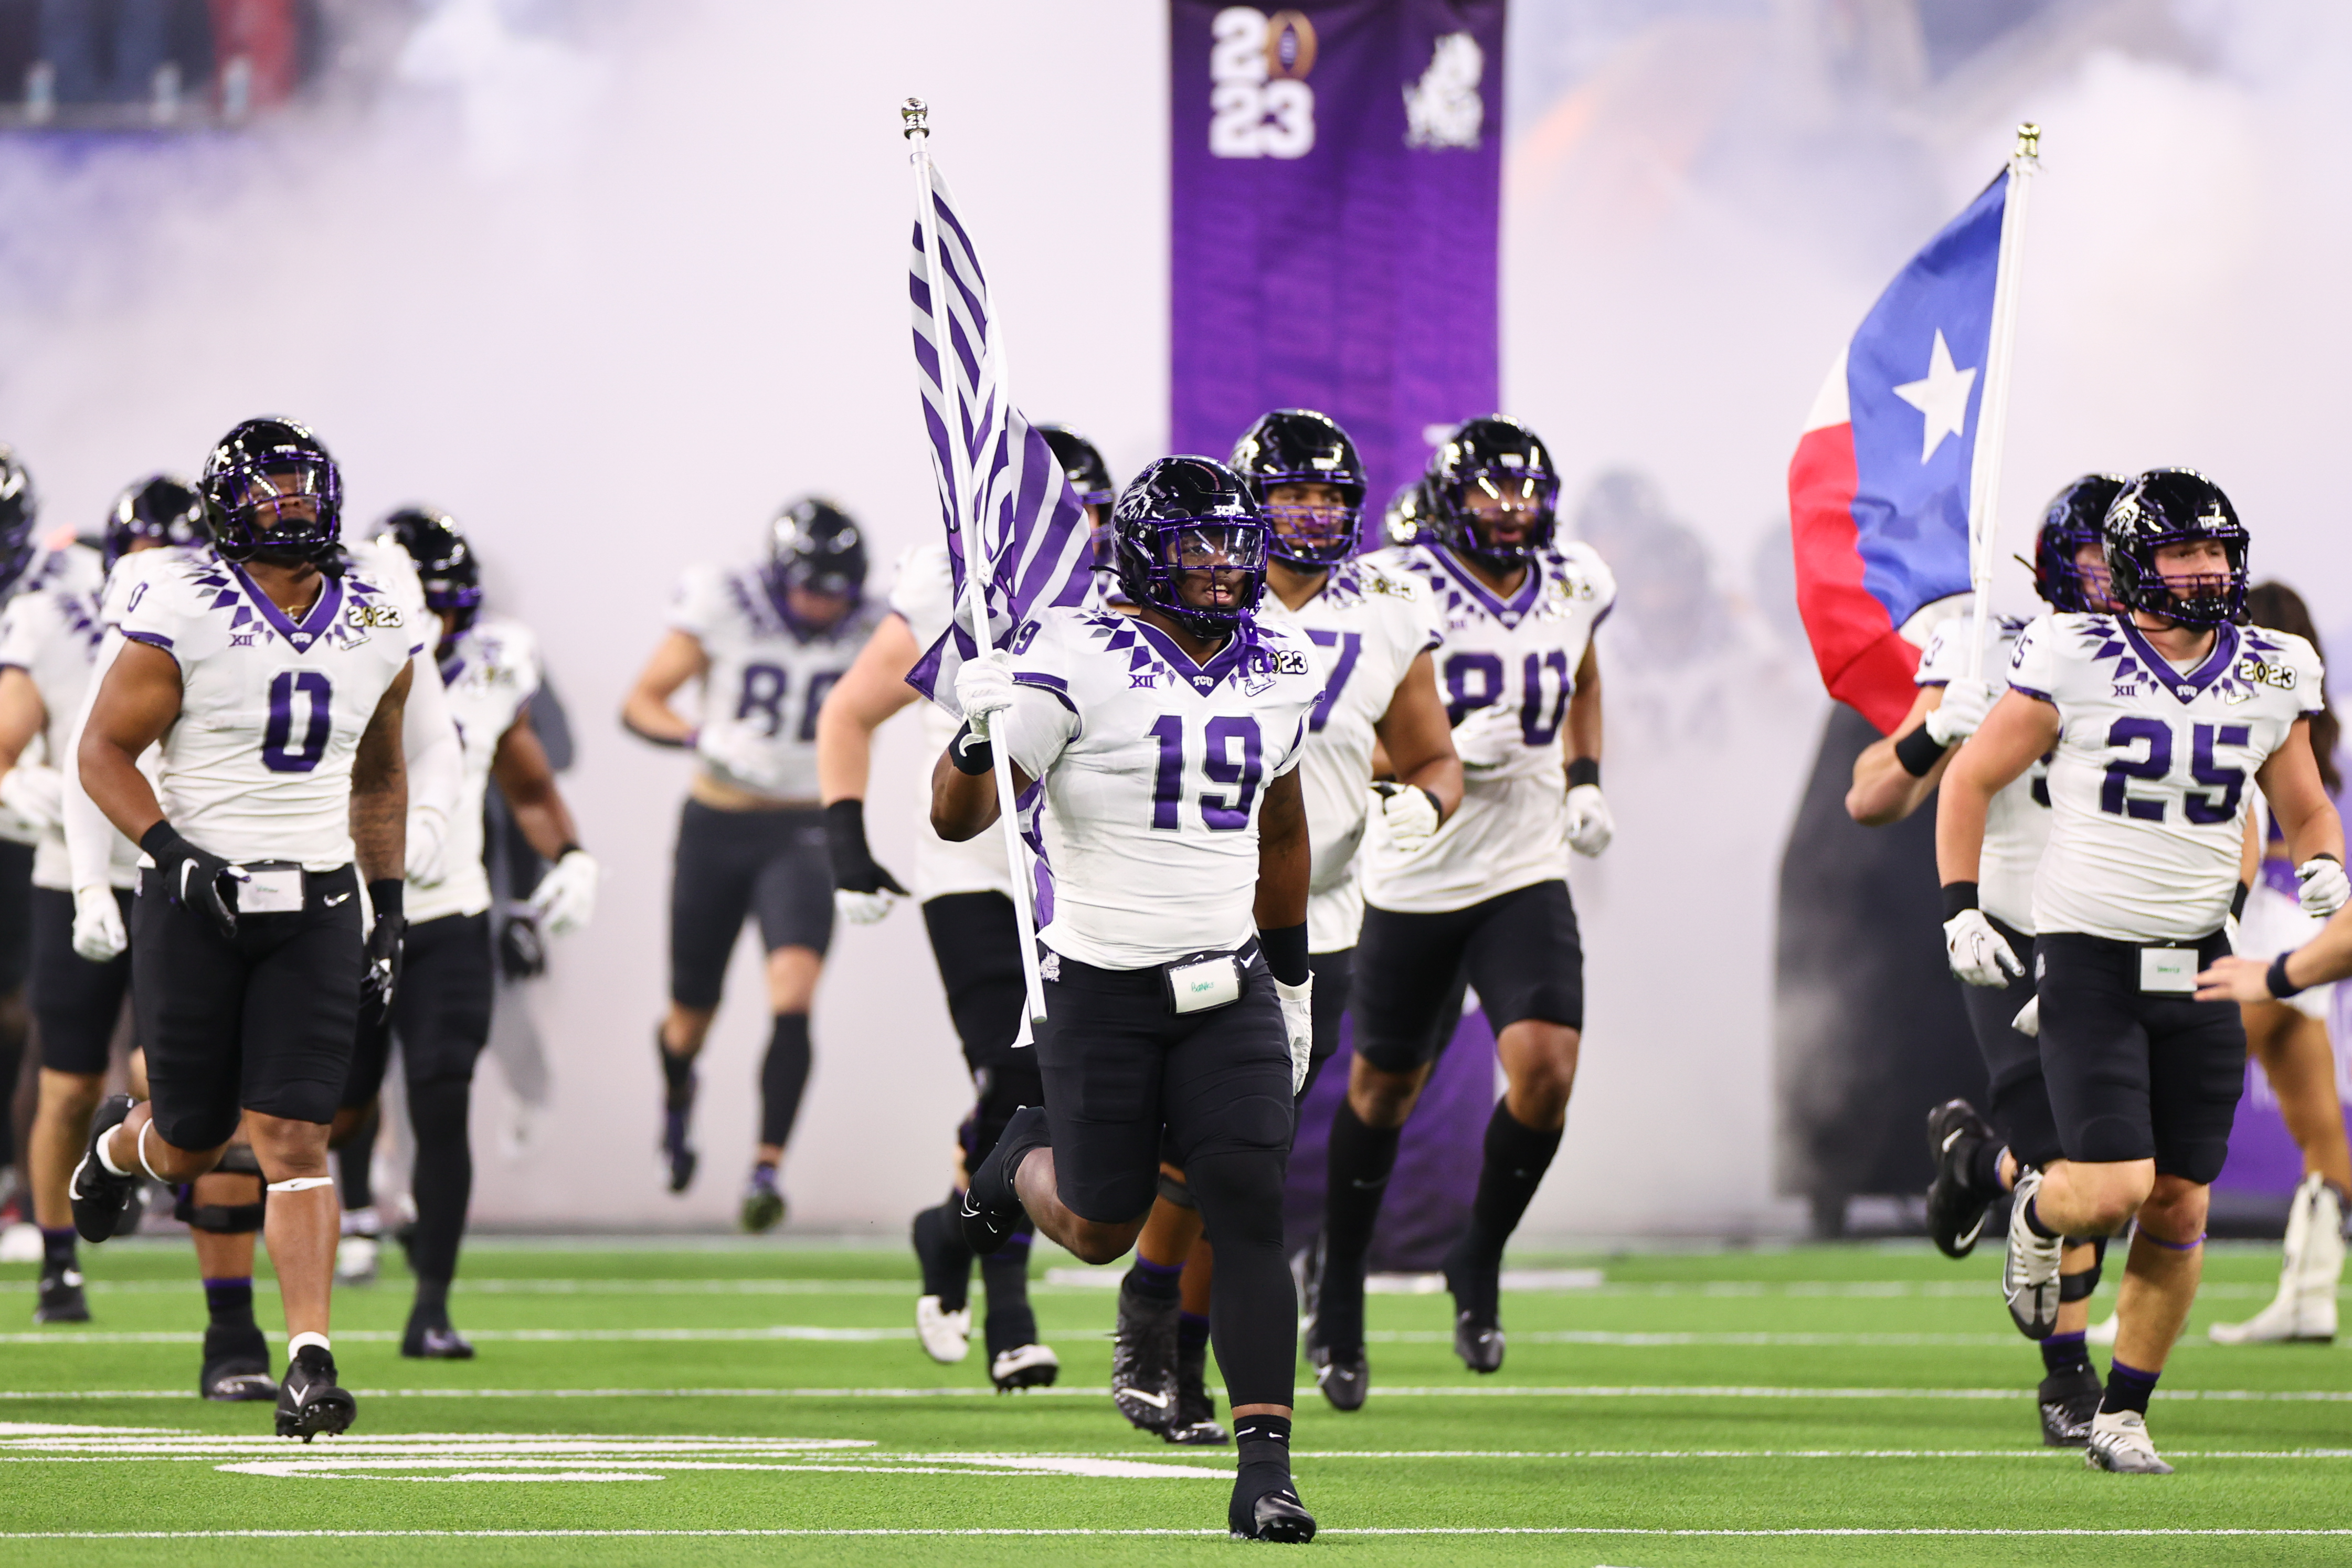 Shadrach Banks #19 of the TCU Horned Frogs runs out to the field before the College Football Playoff National Championship game against the Georgia Bulldogs held at SoFi Stadium on January 9, 2023 in Inglewood, California.